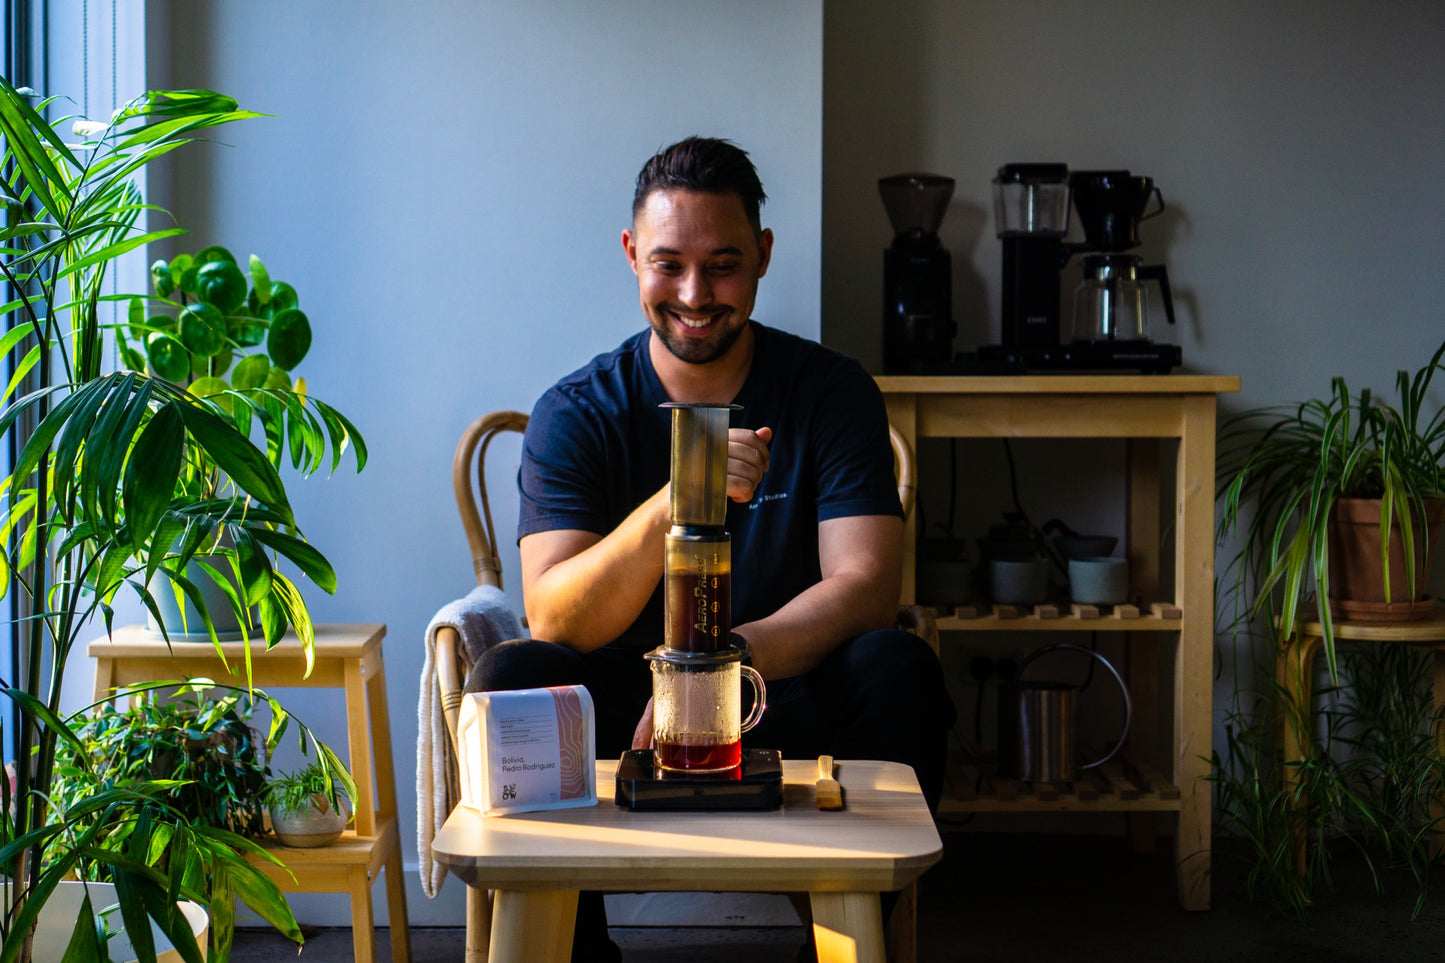 Charlie watches on with a smile as the Aeropress works its magic on Sow coffee.